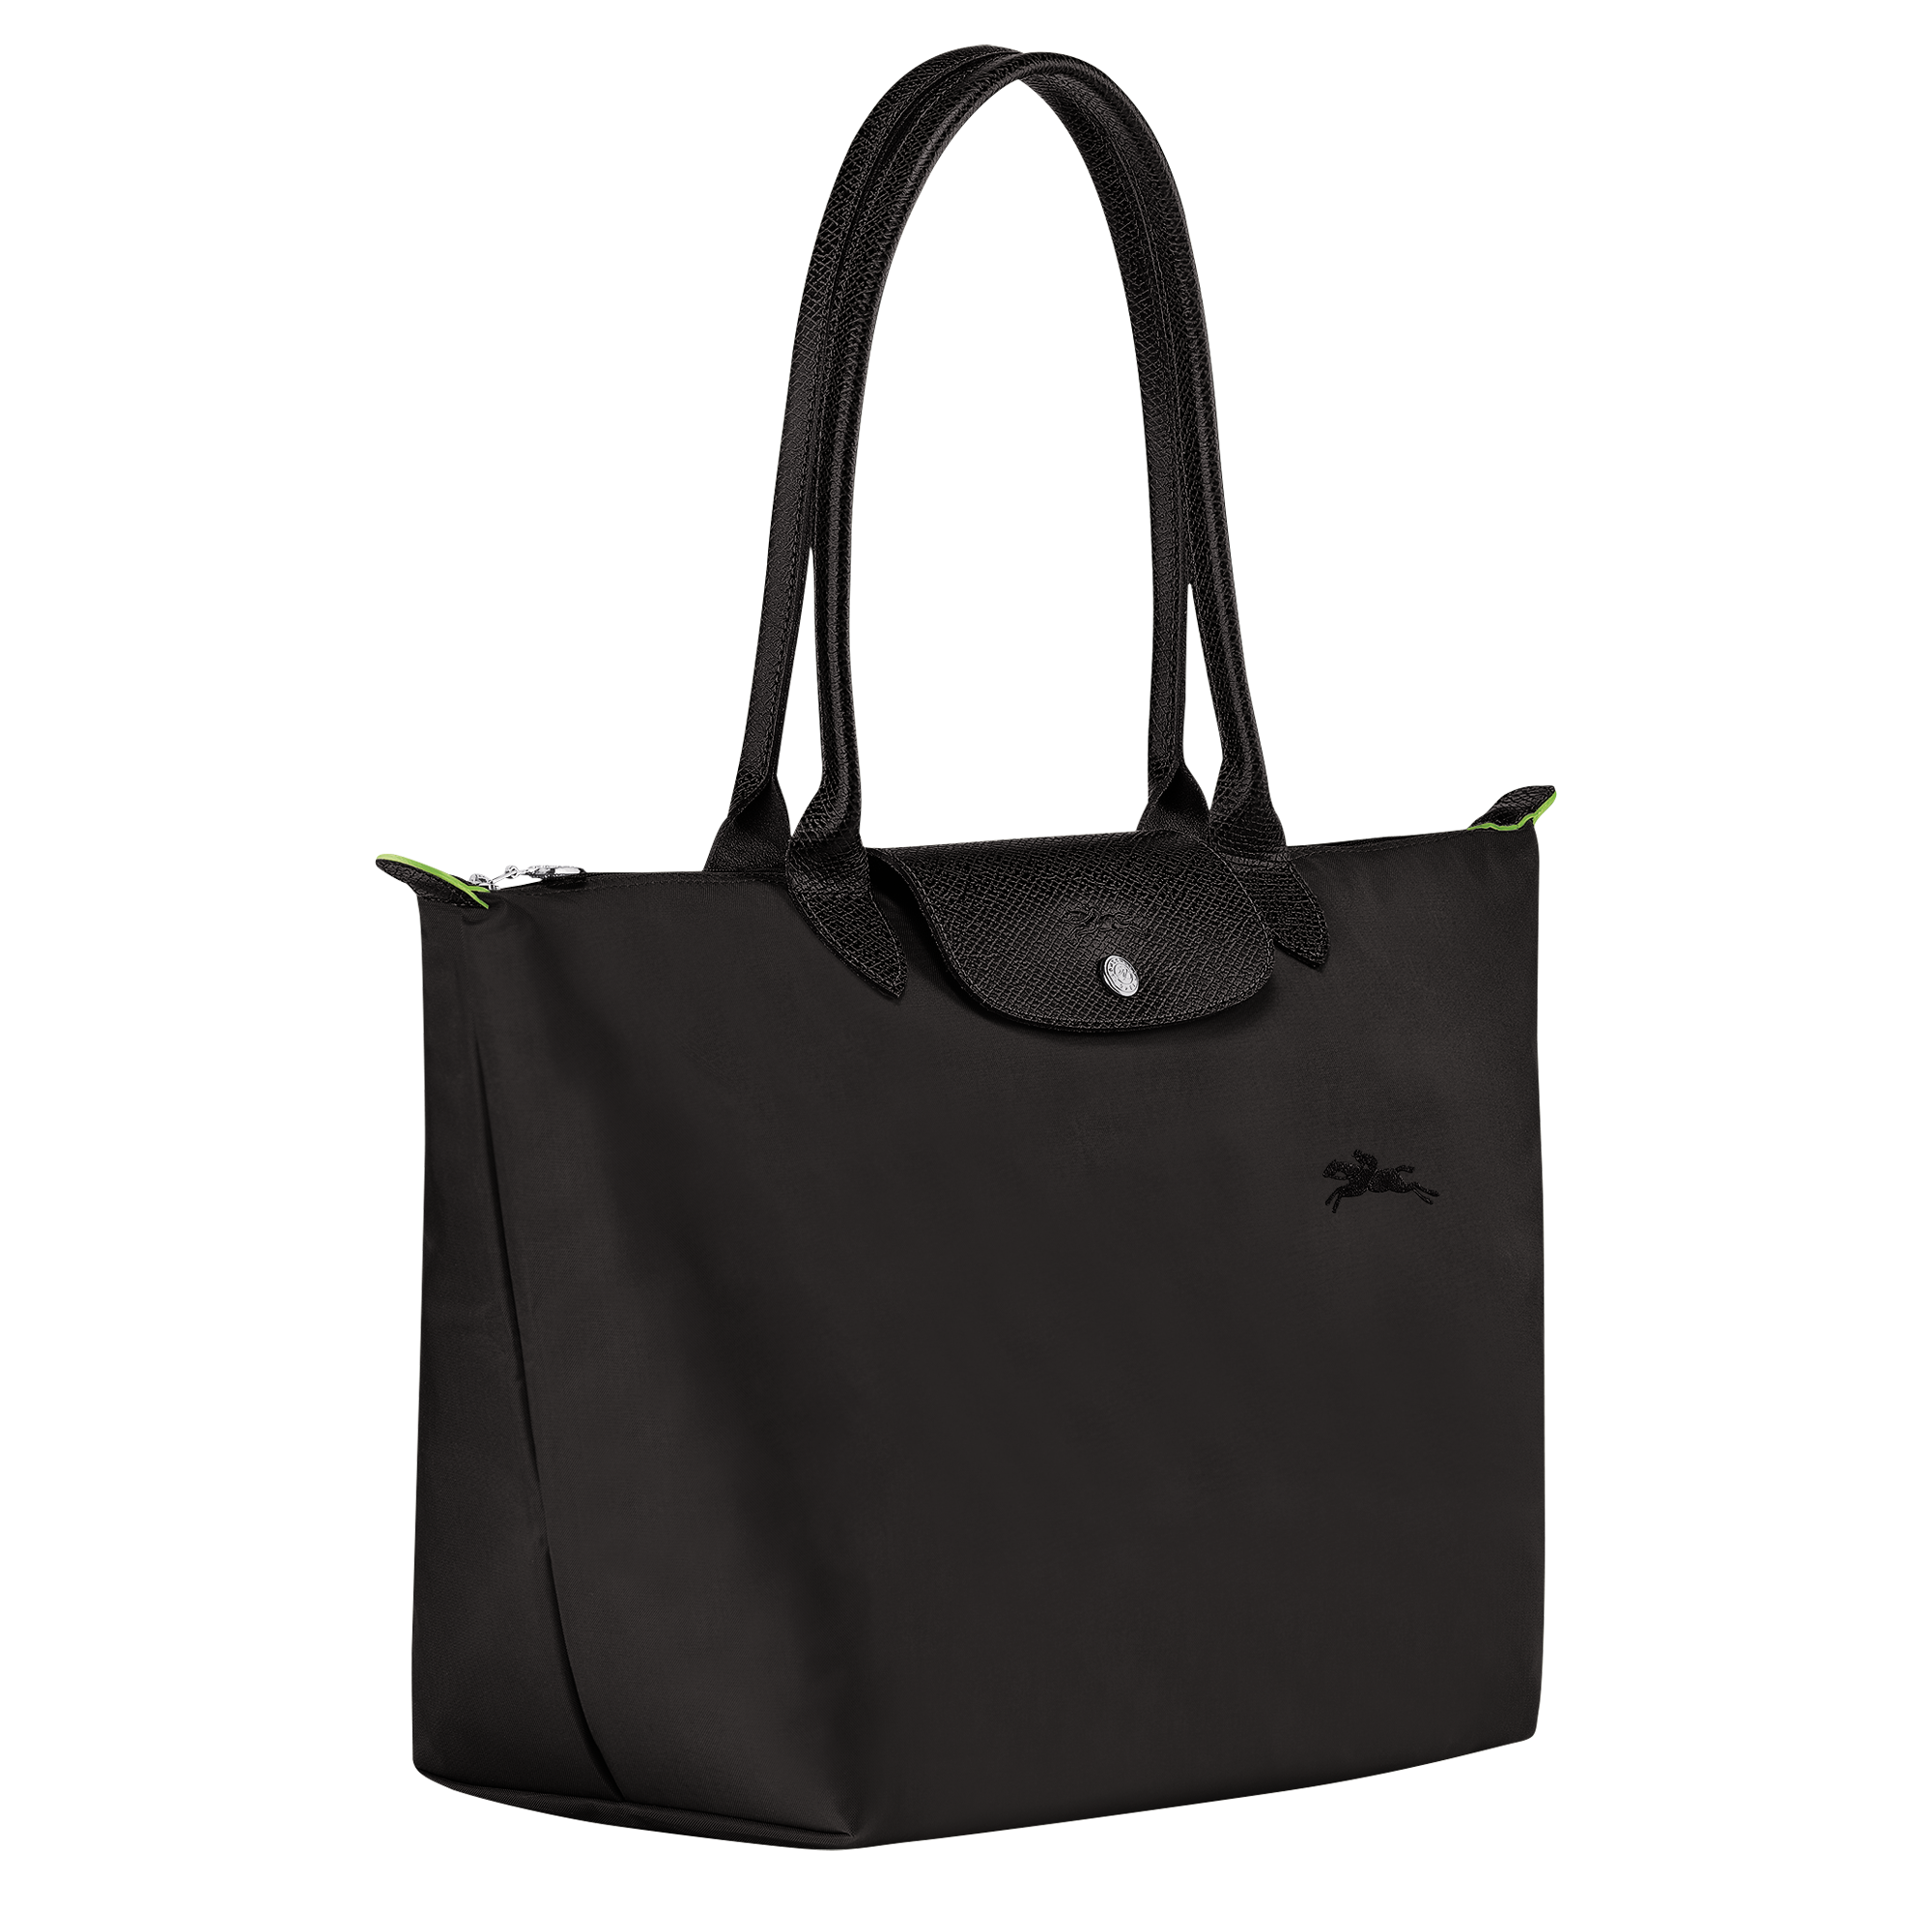 Le Pliage Green L Tote bag Black - Recycled canvas (L1899919001)